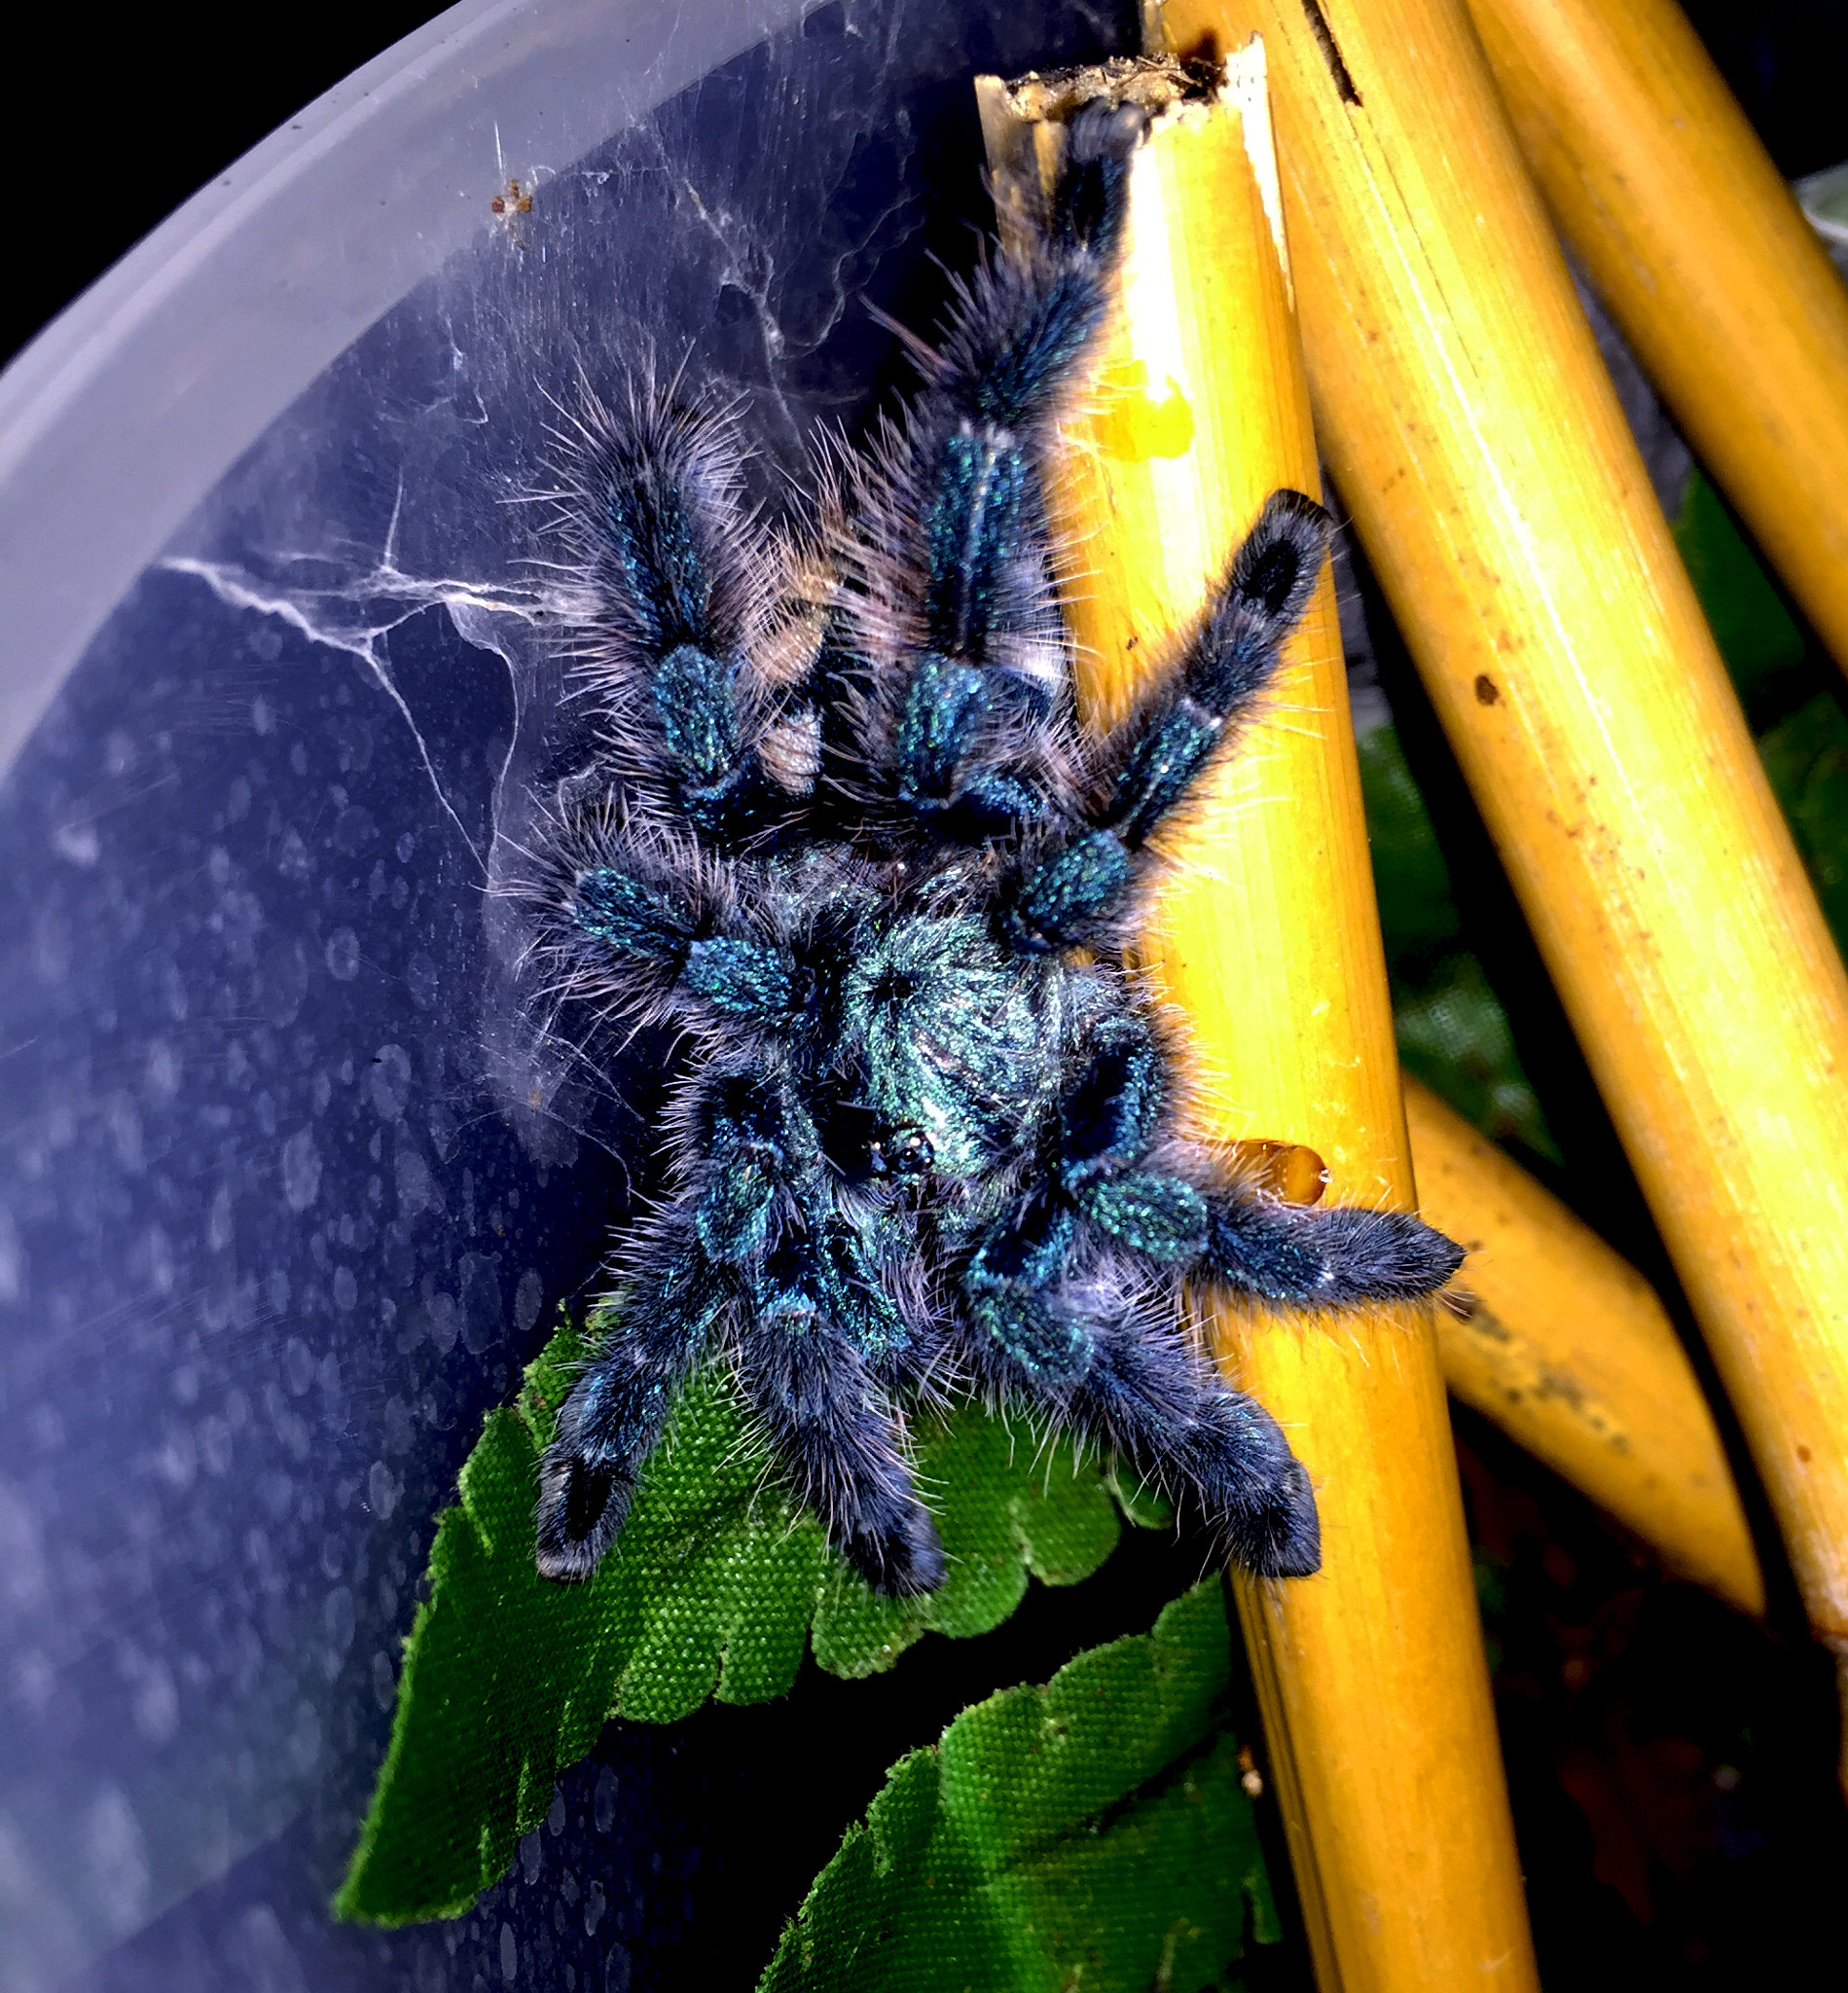 Apple iPhone7,2 + iPhone 6 back camera 4.15mm f/2.2 sample photo. Avicularia versicolor photography